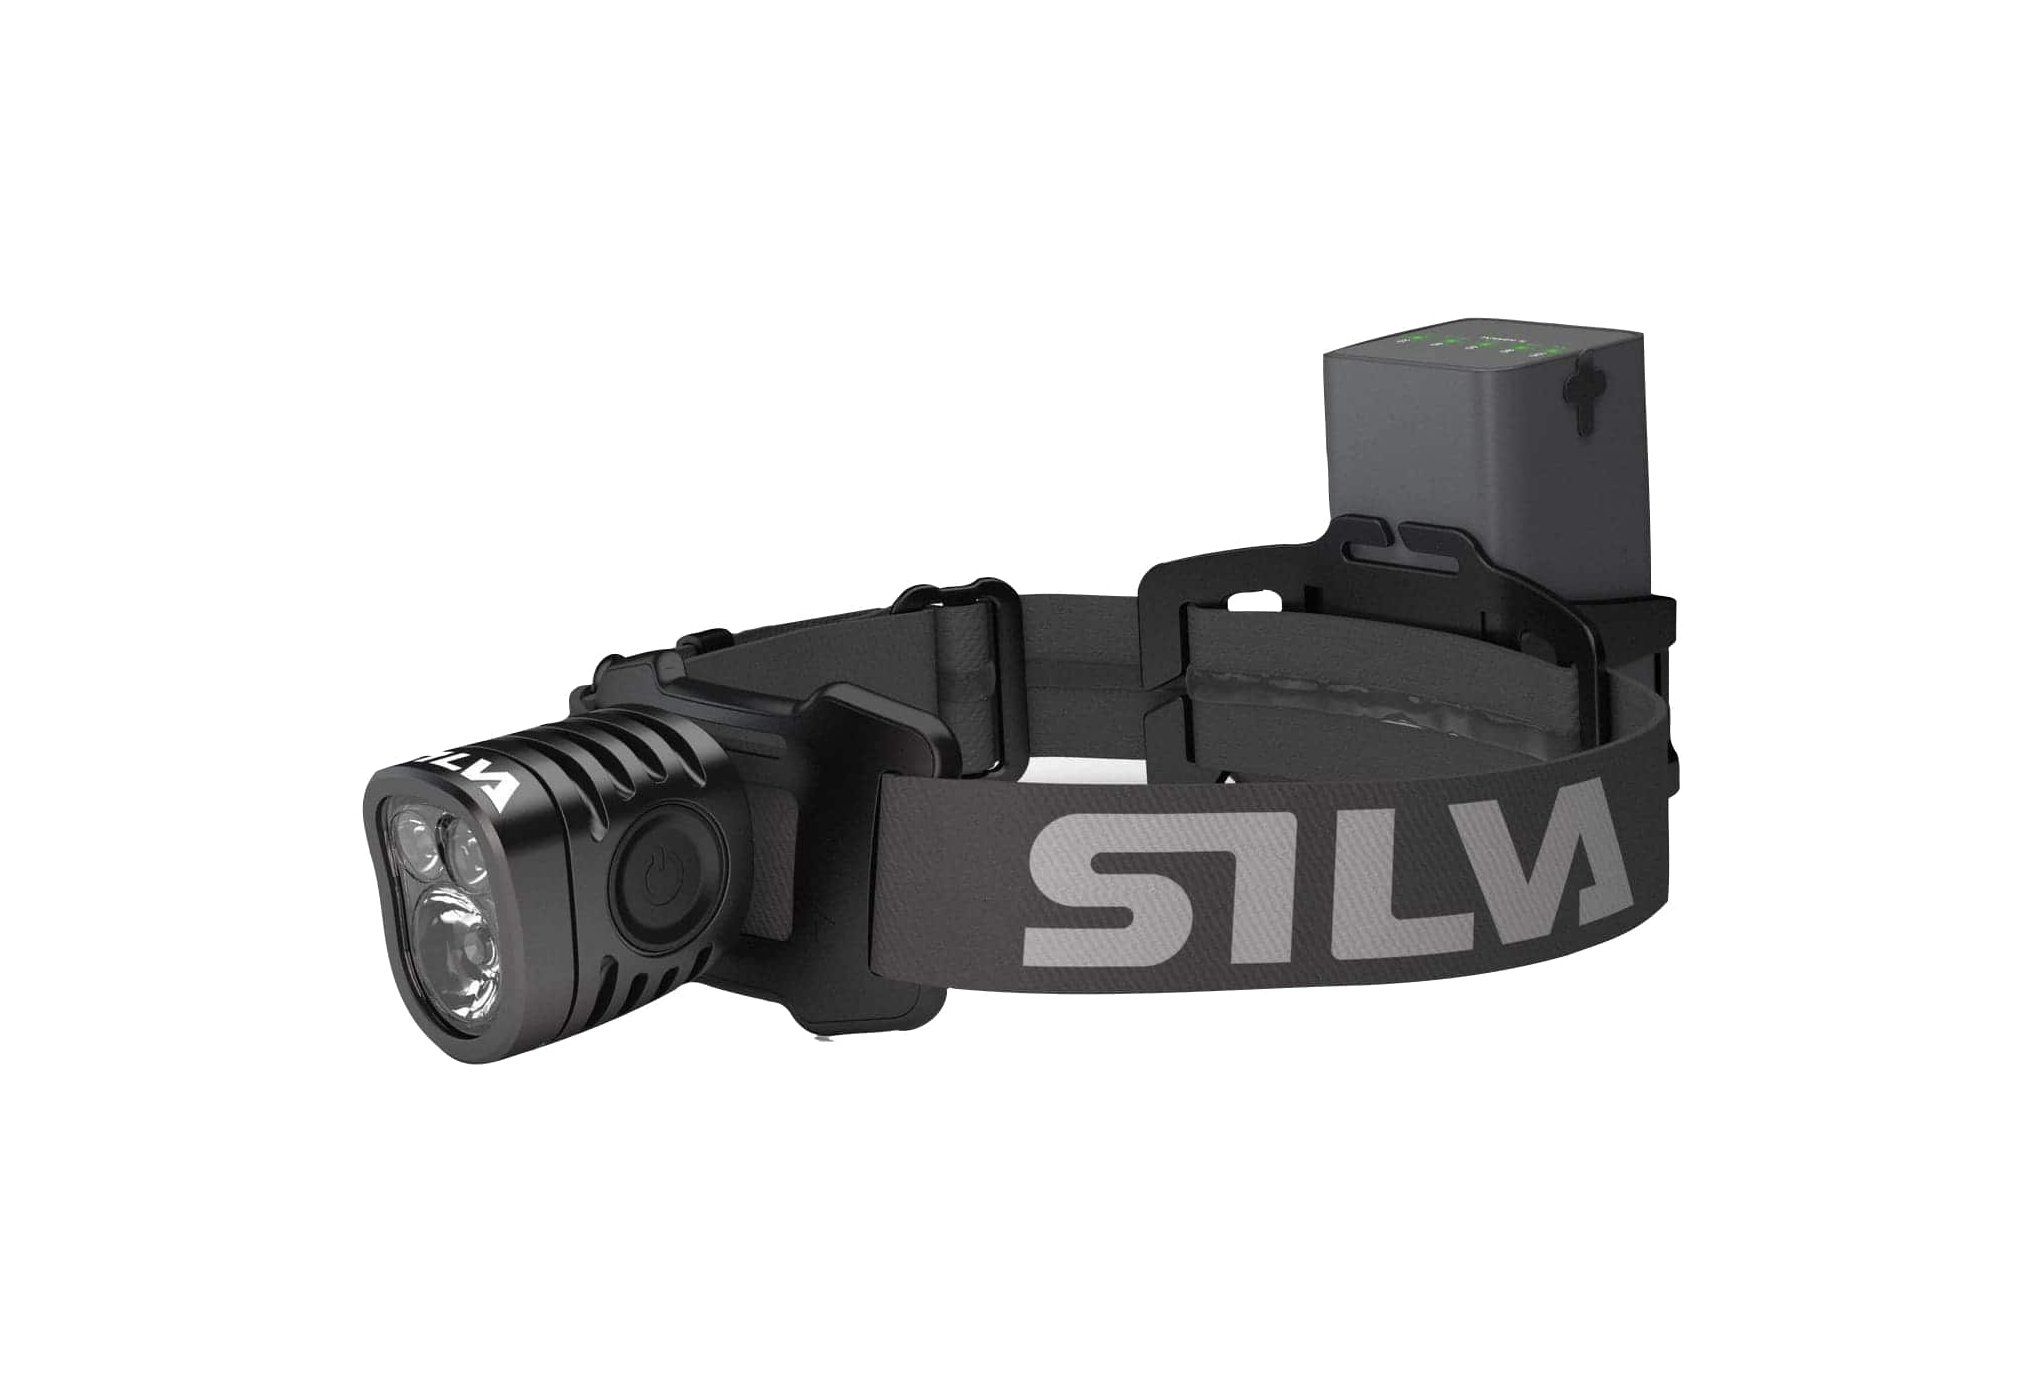 Silva Exceed 4X Lampe frontale / éclairage